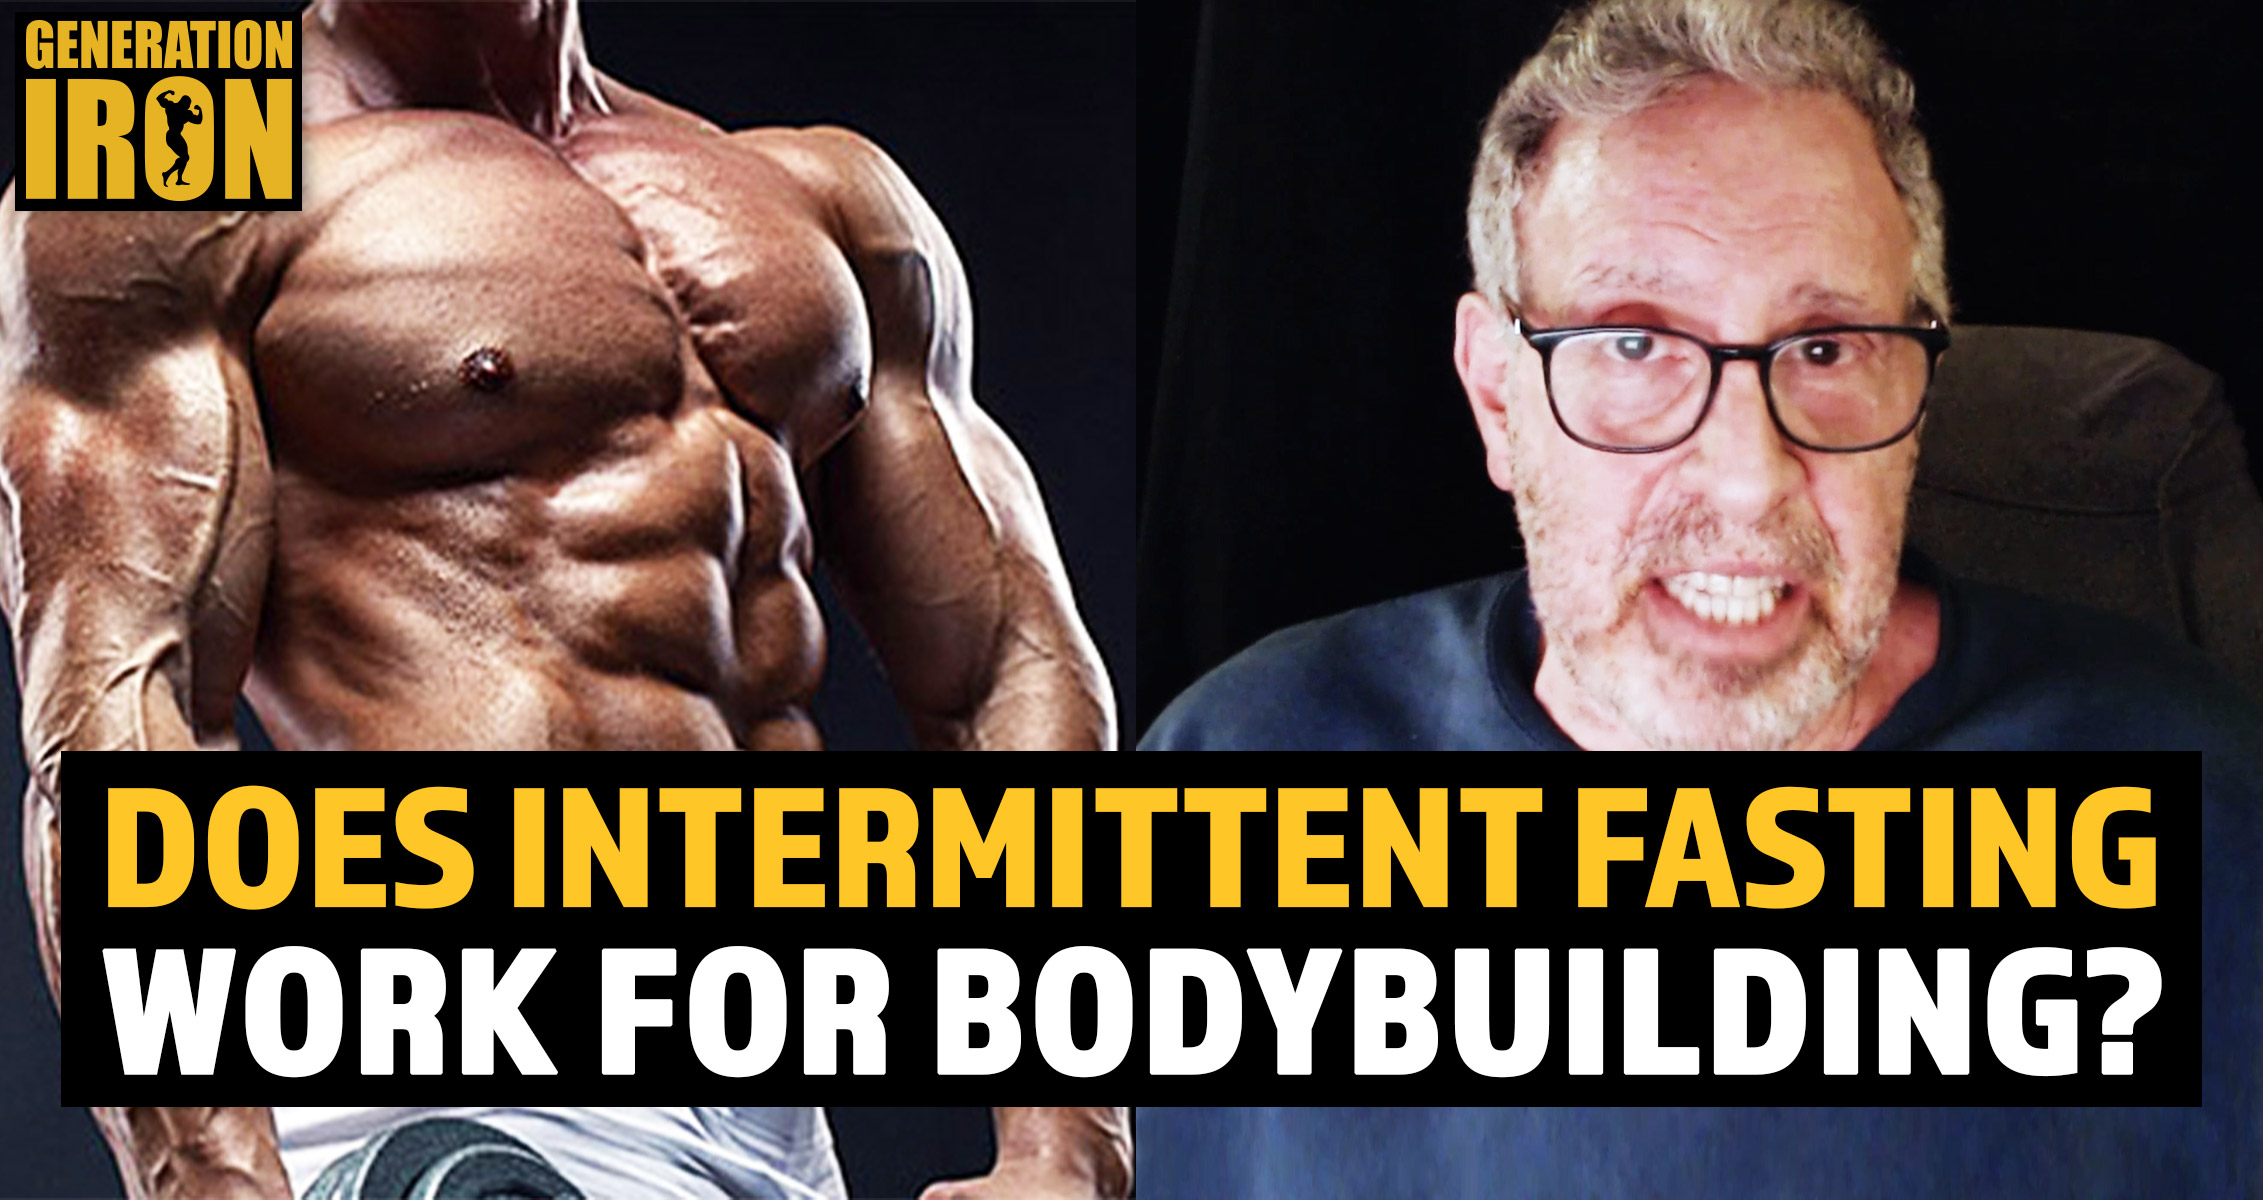 Is Intermittent Fasting Effective For Fat Loss? Does It Lead To Muscle Loss?